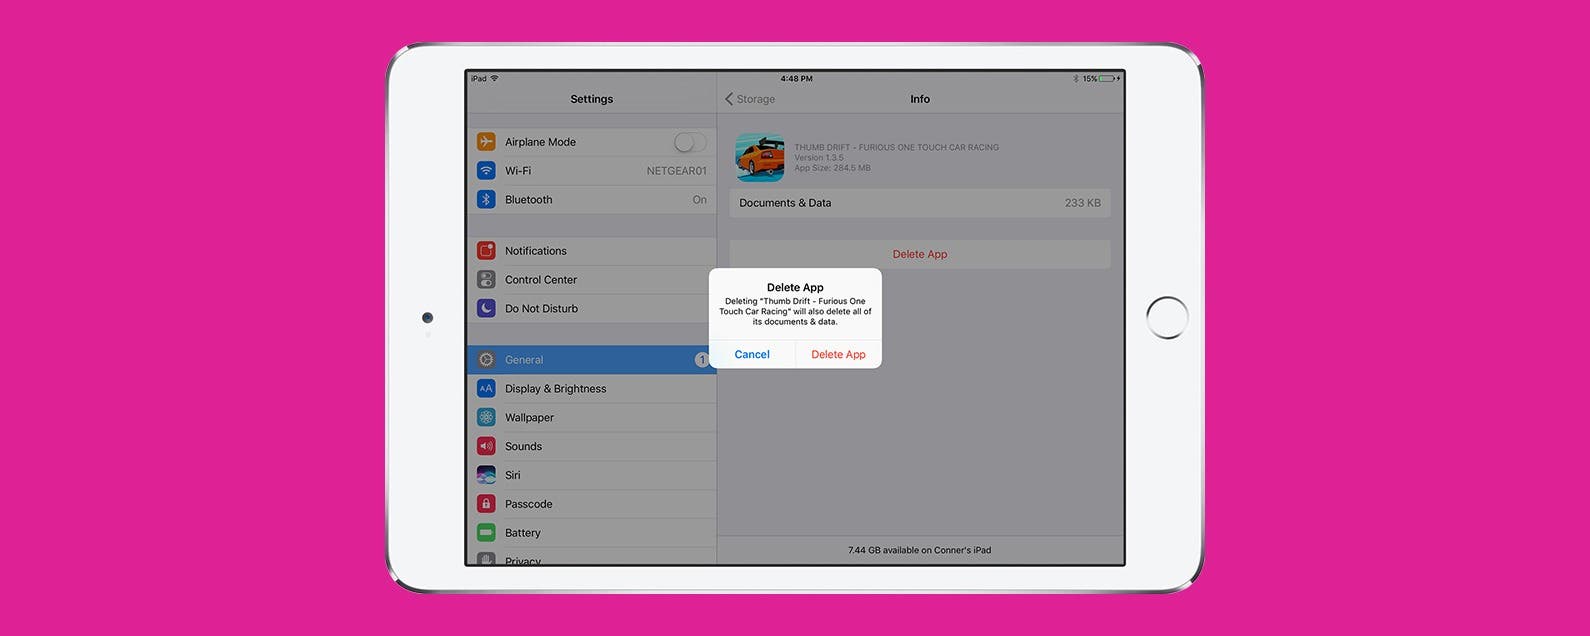 Delete Remove Uninstall How To Get Rid Of Apps On The Ipad - how to change your name on roblox for free on ipad